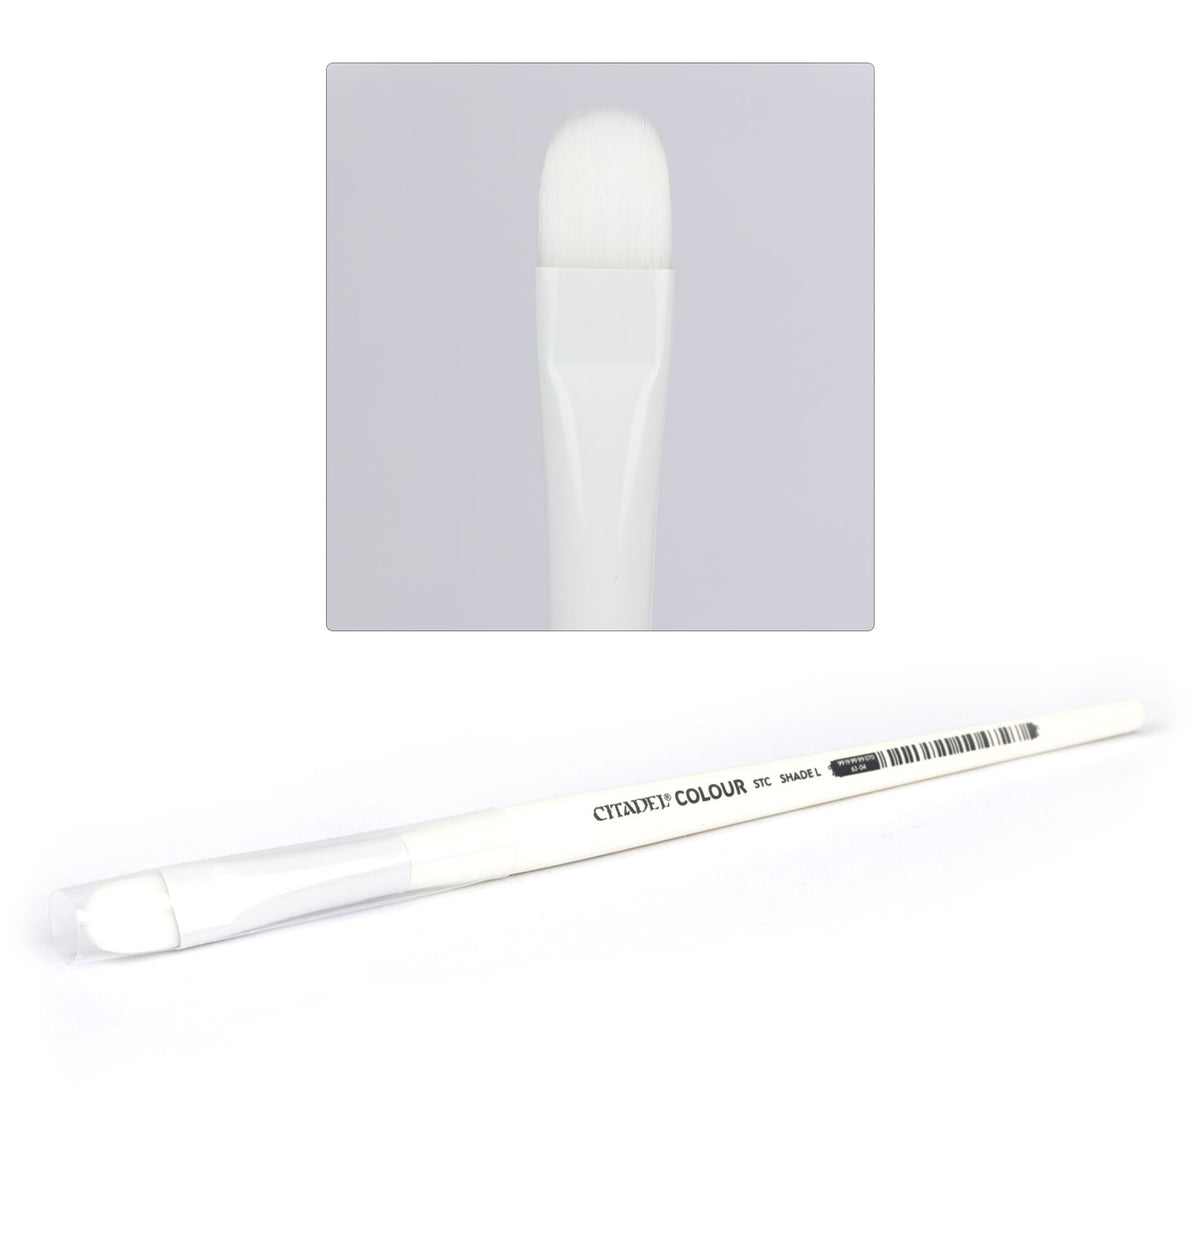 Large Synthetic Shade Brush (Citadel Colour)